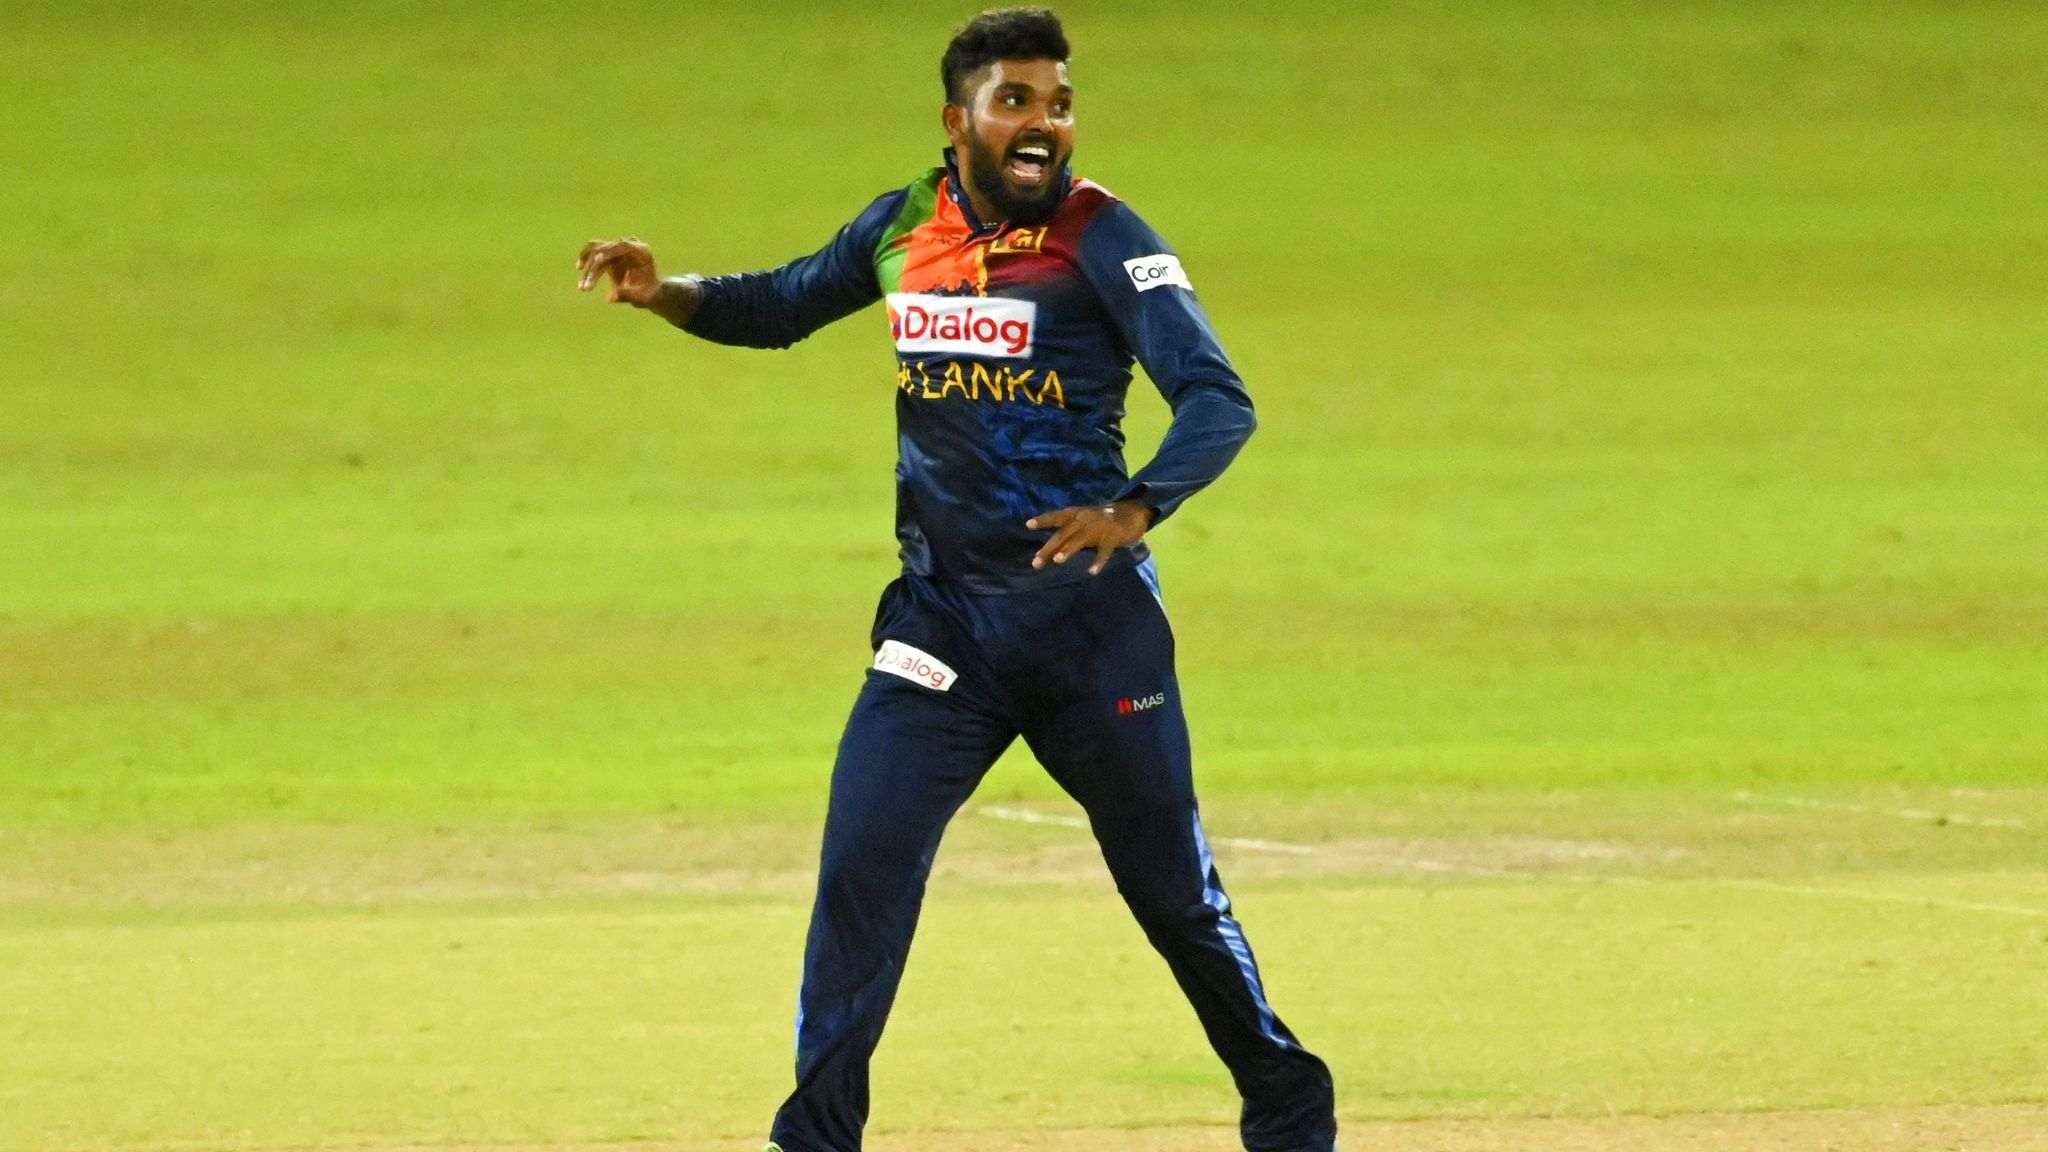 'Excited, honoured & thrilled': Wanindu Hasaranga expresses delight after joining RCB 